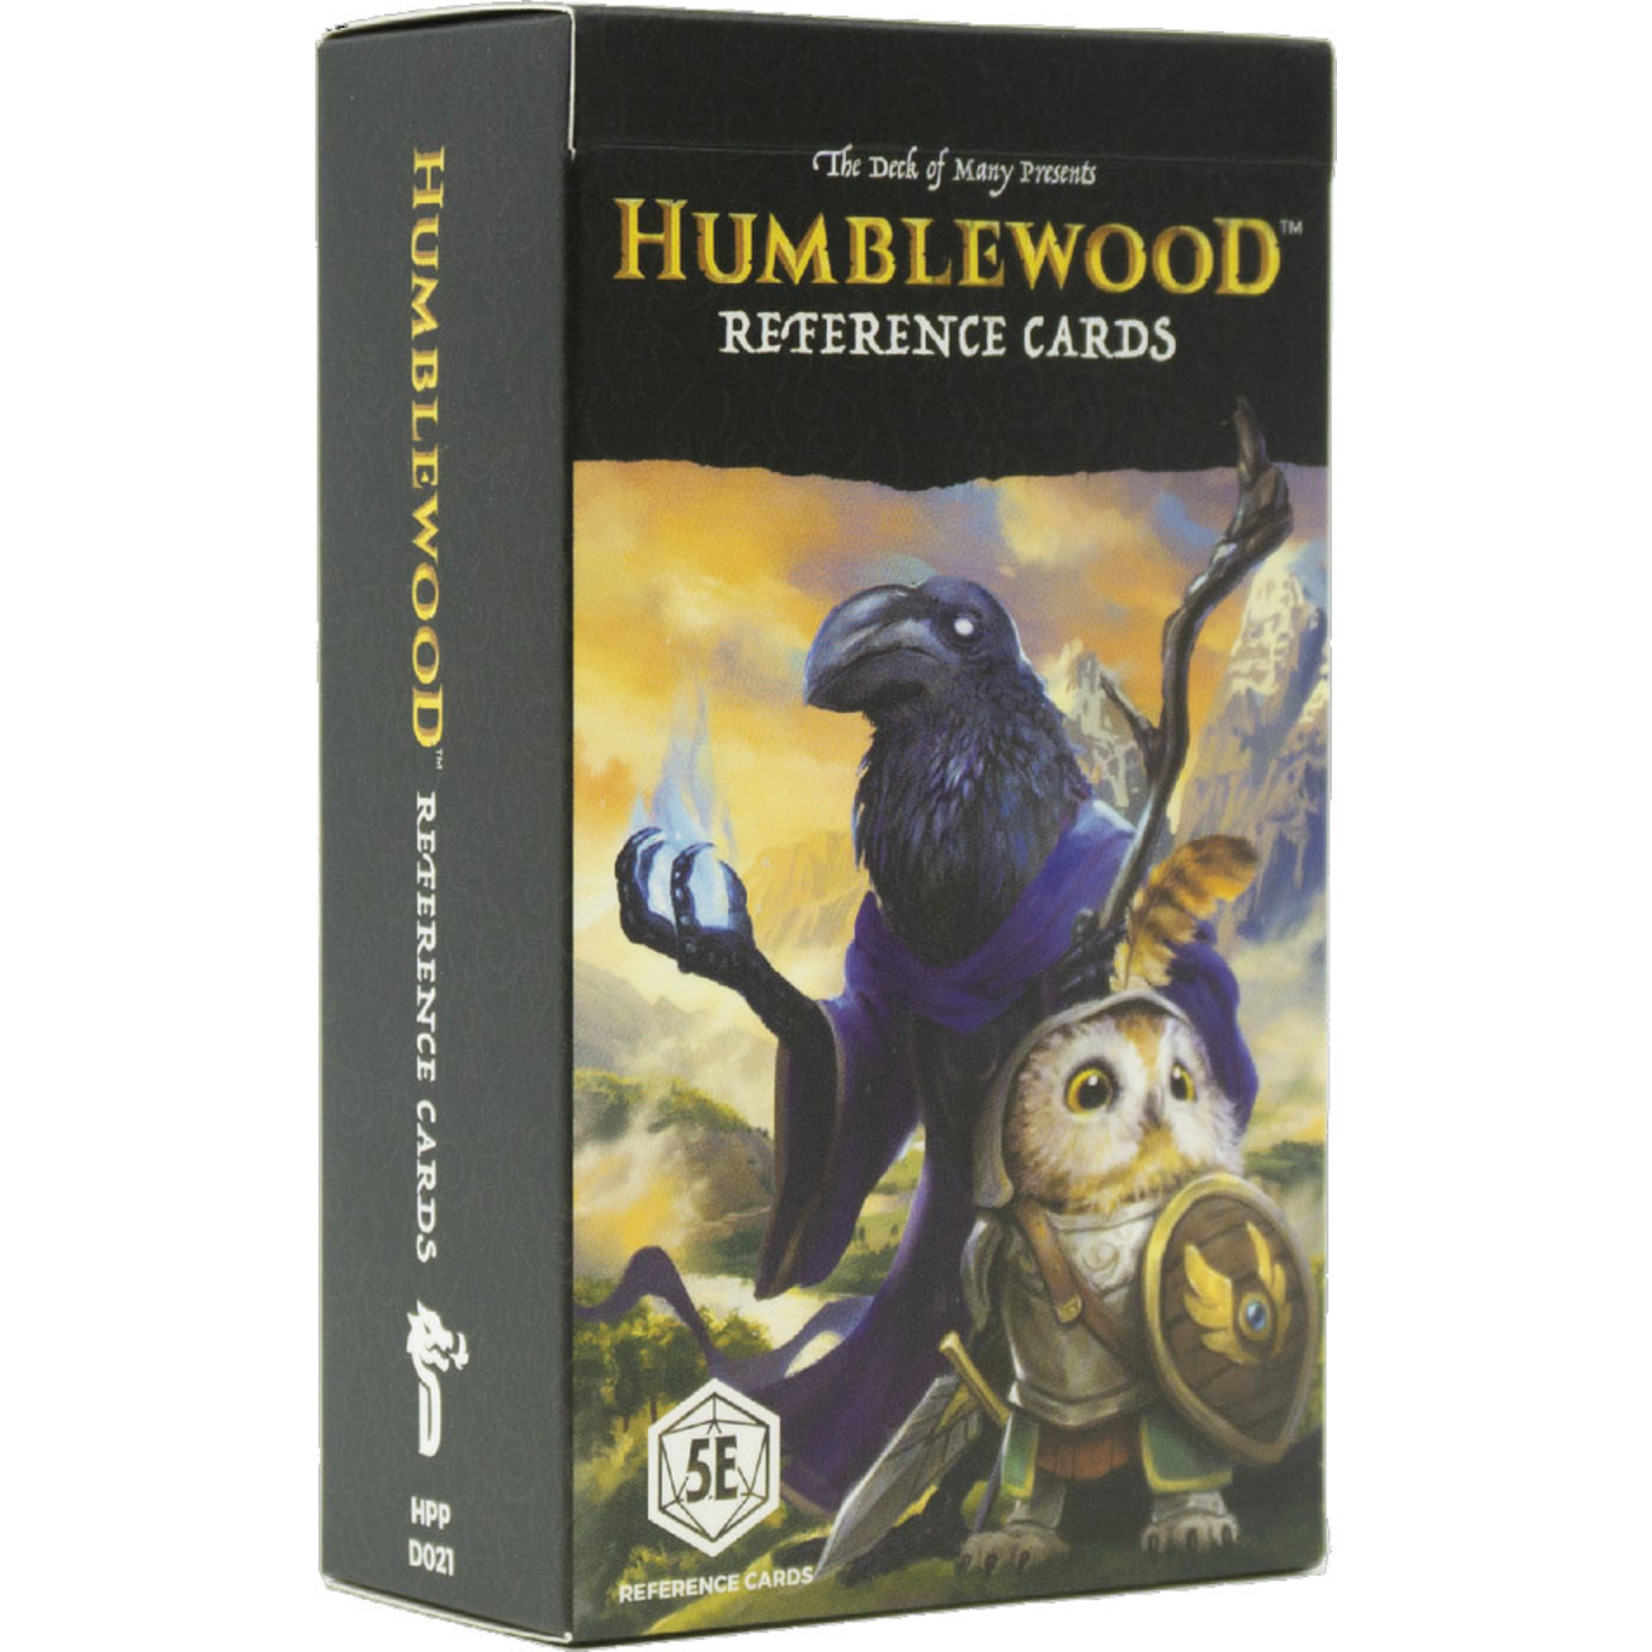 HitPoint Press Humblewood (5E): Reference Cards